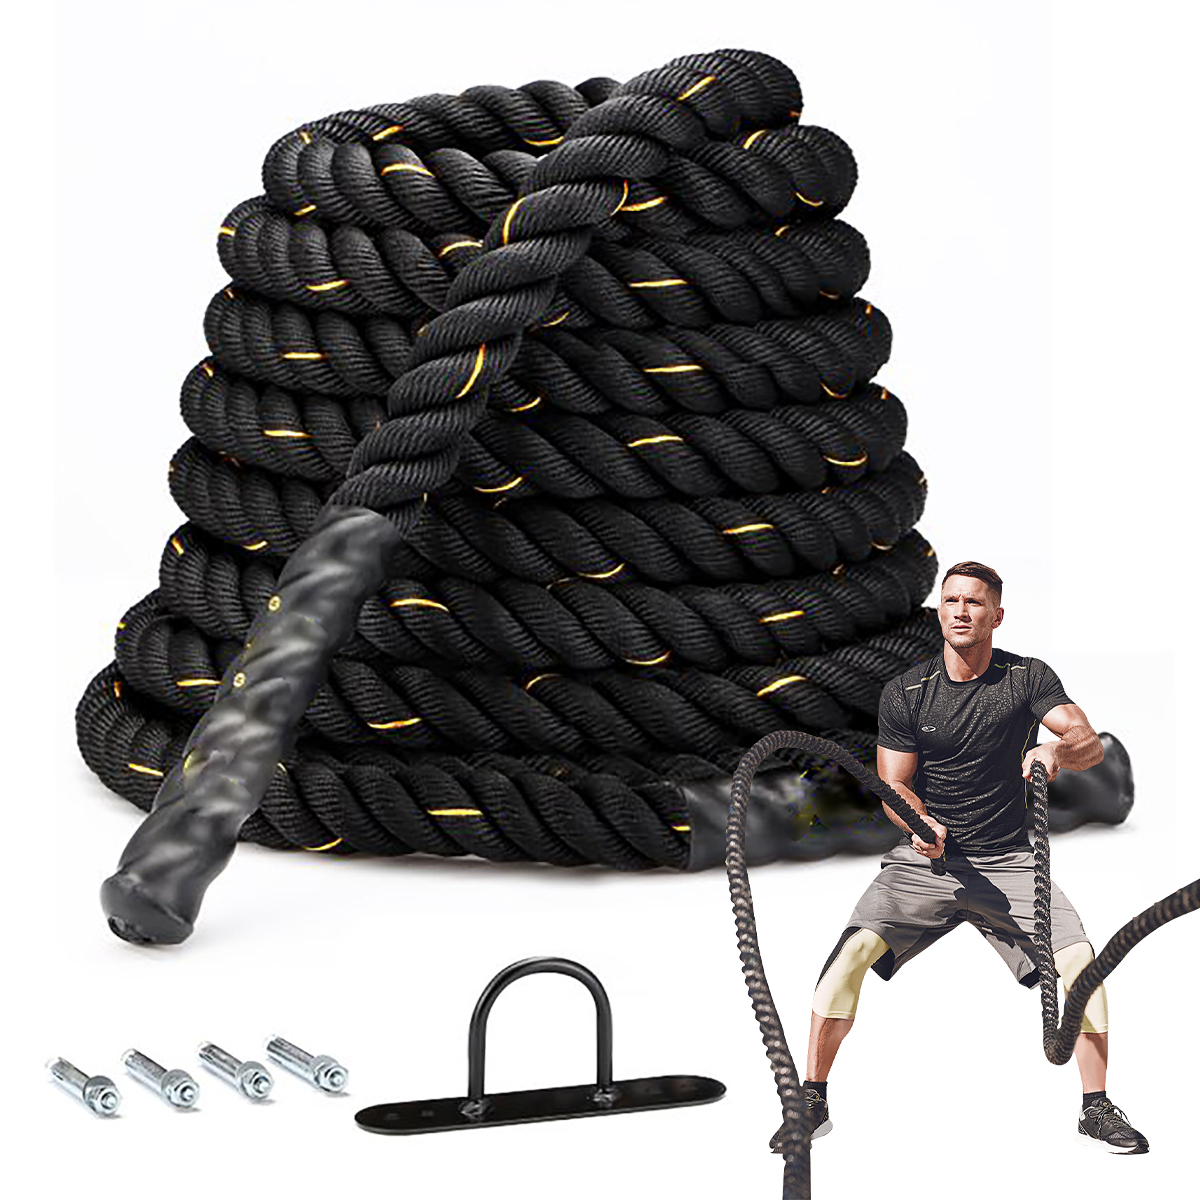 30Ft KingSo 1.5inch Heavy Exercise Training Rope $29 + free s/h at Walmart